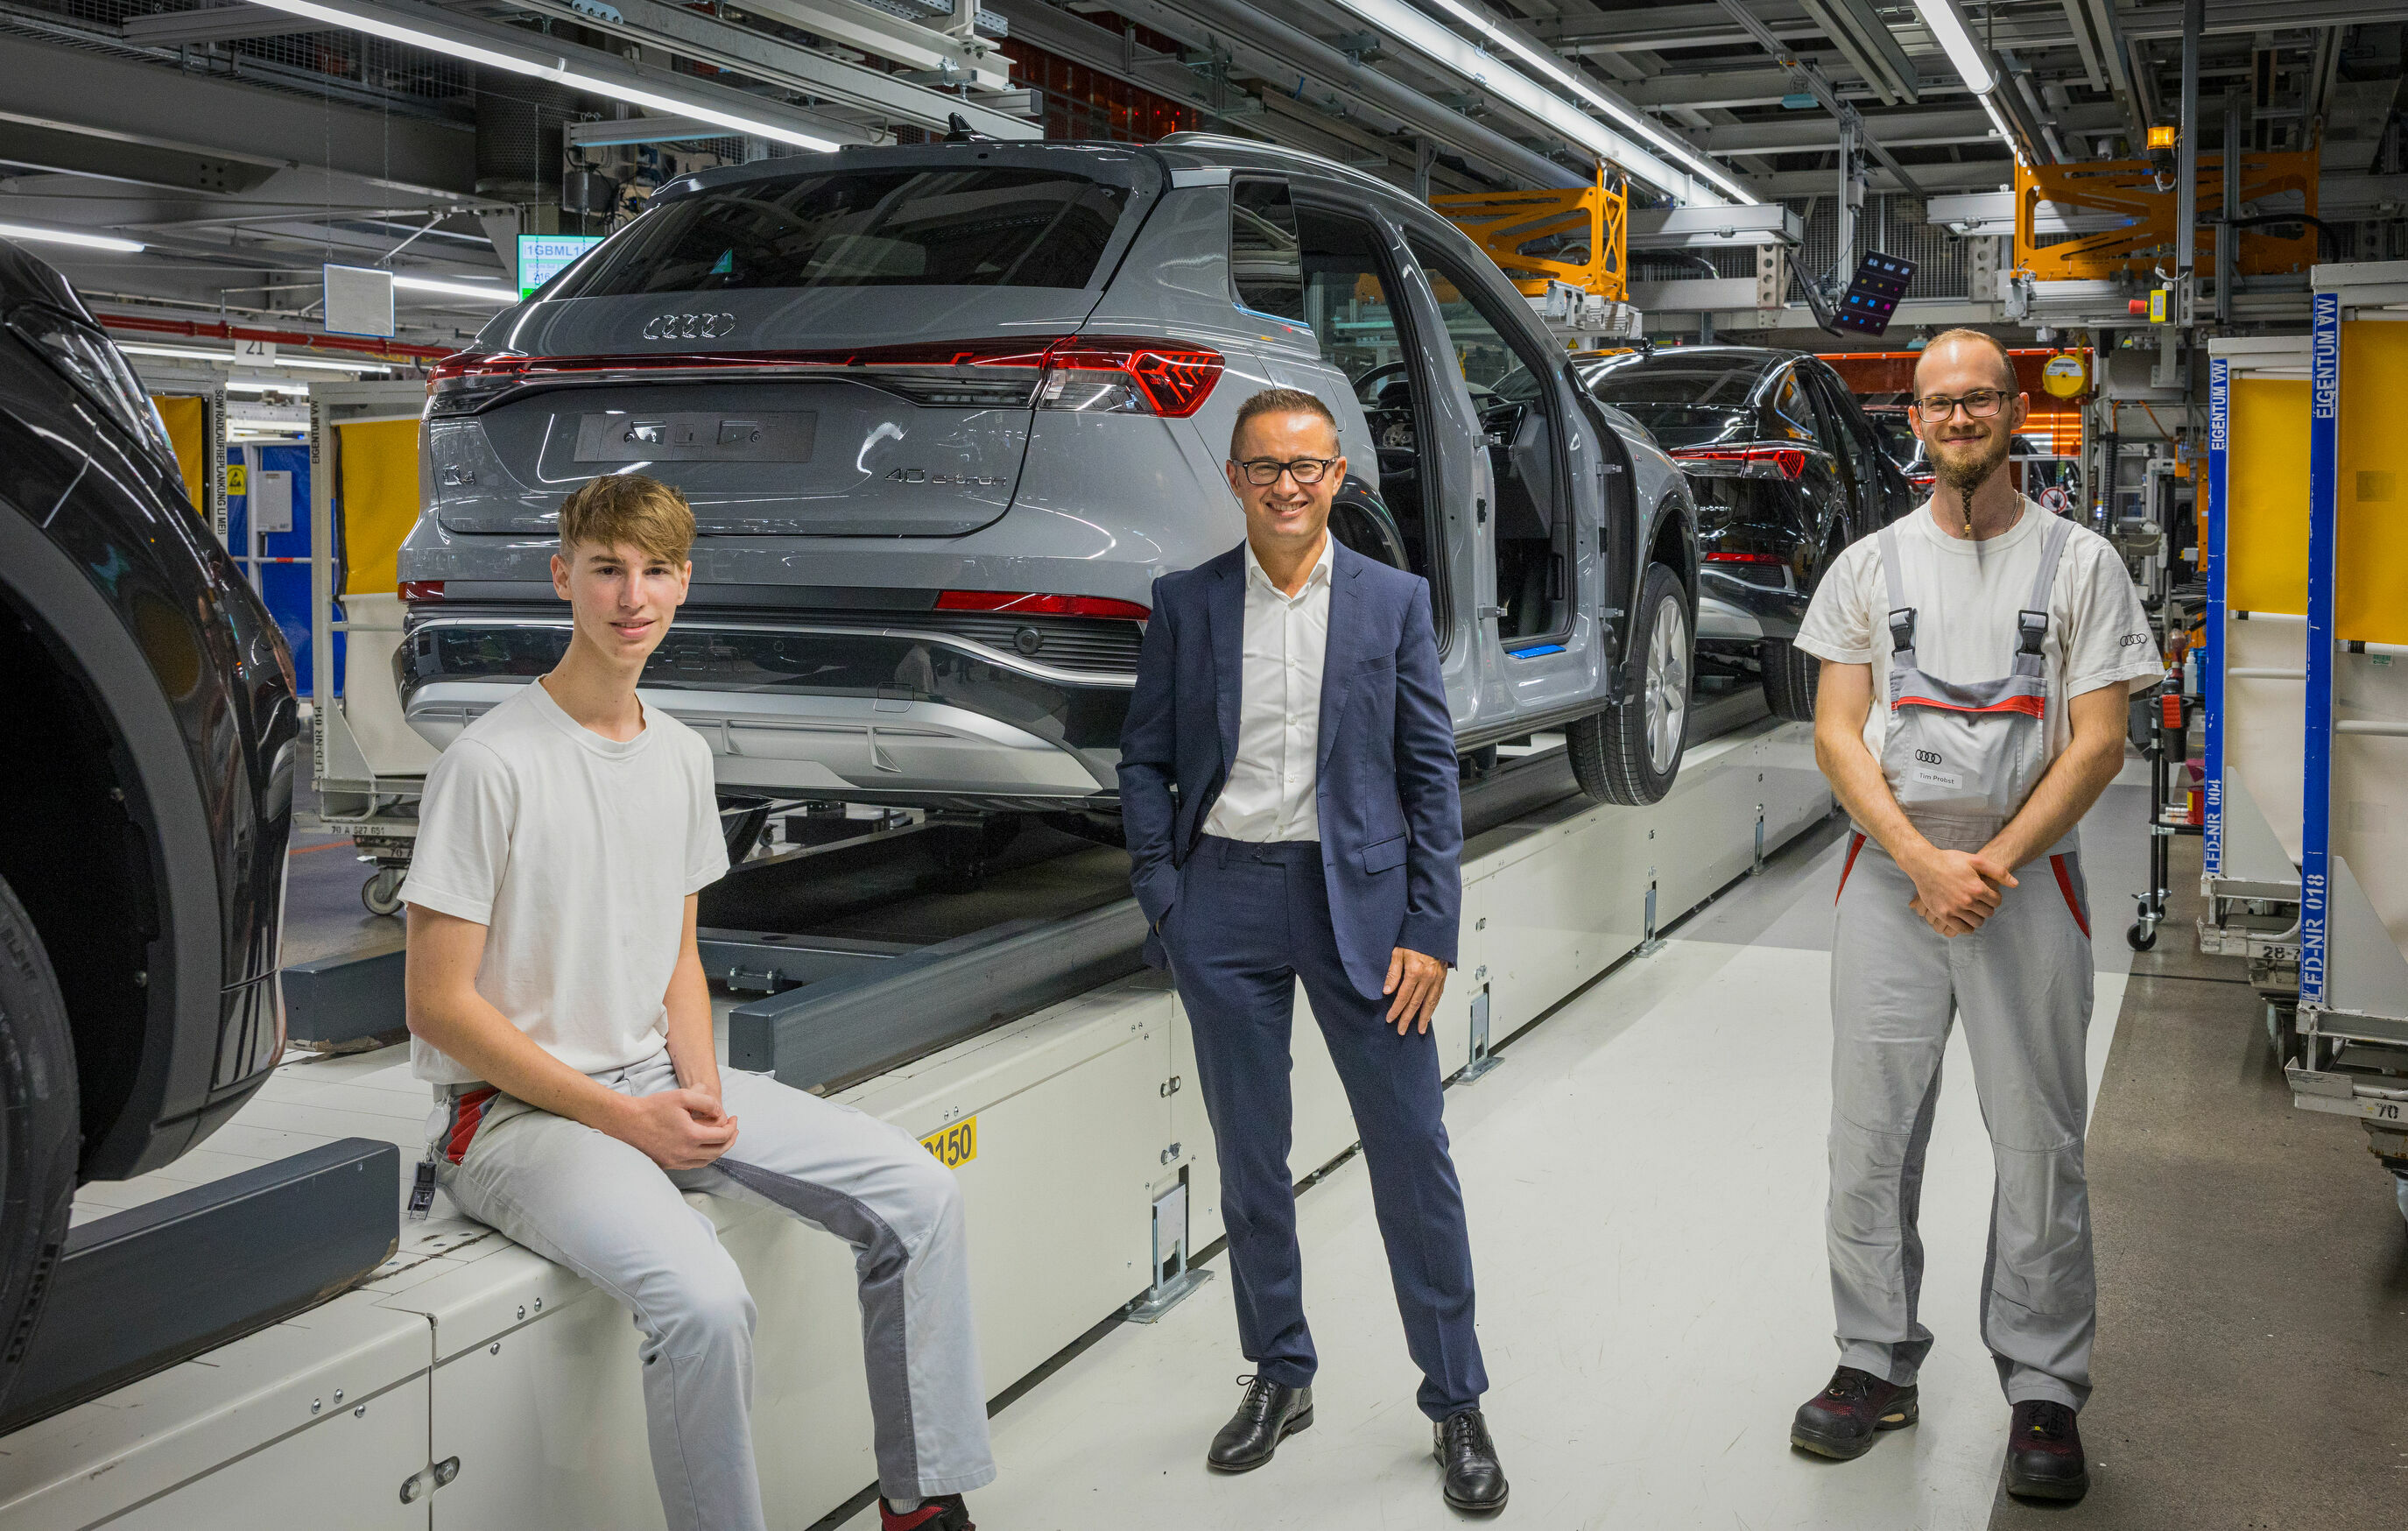 The Audi Q4 e-tron’s success story: in its transition to electromobility, Audi is turning to synergies within the whole group